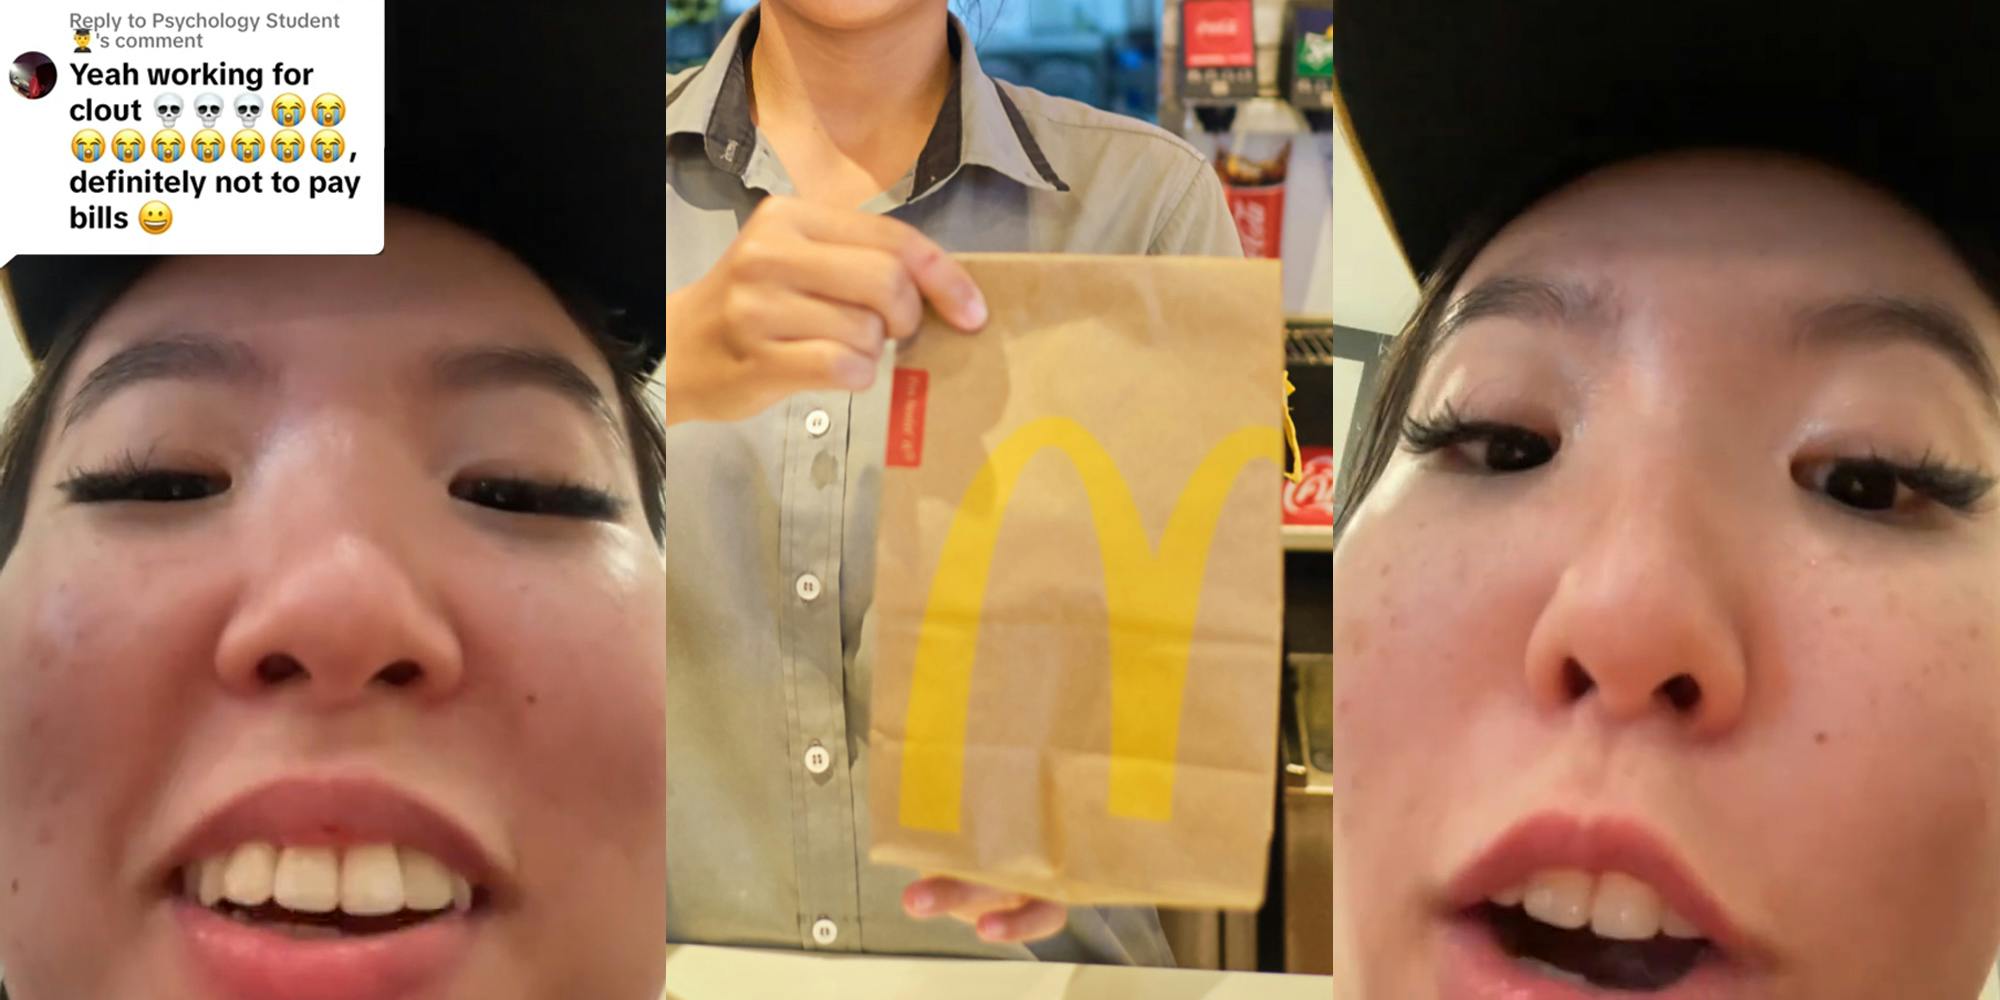 McDonald's employee speaking with caption "Yeah working for clout definitely not to pay bills" (l) McDonald's worker holding bag of food (c) McDonald's employee speaking (r)